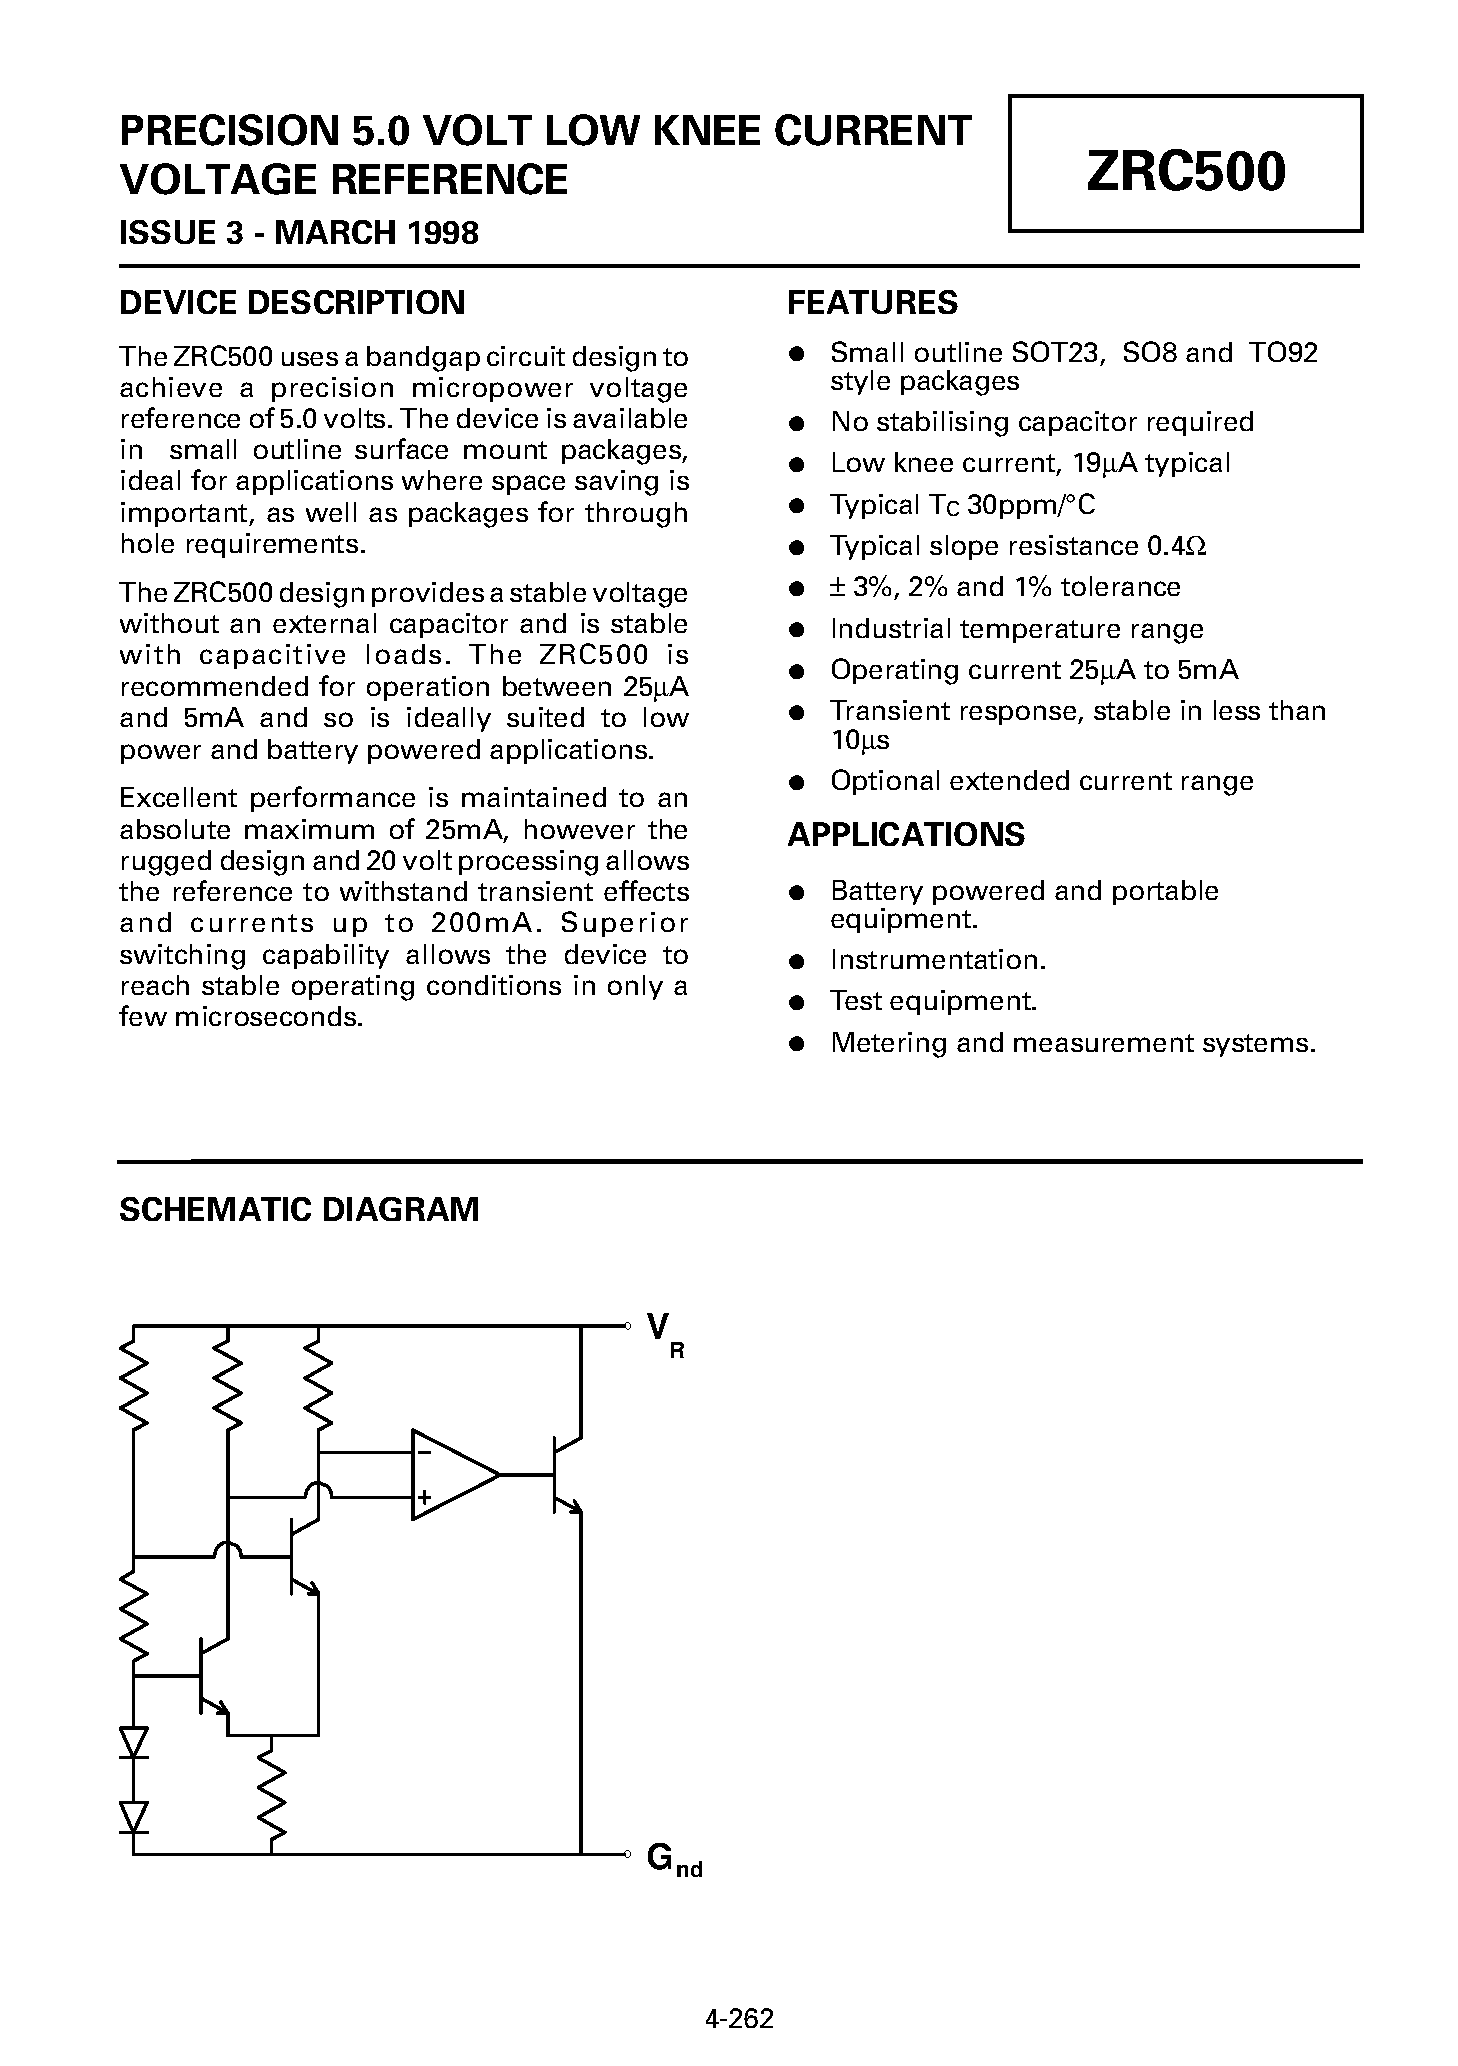 Datasheet ZRC500A01 - PRECISION 5.0 VOLT LOW KNEE CURRENT VOLTAGE REFERENCE page 1